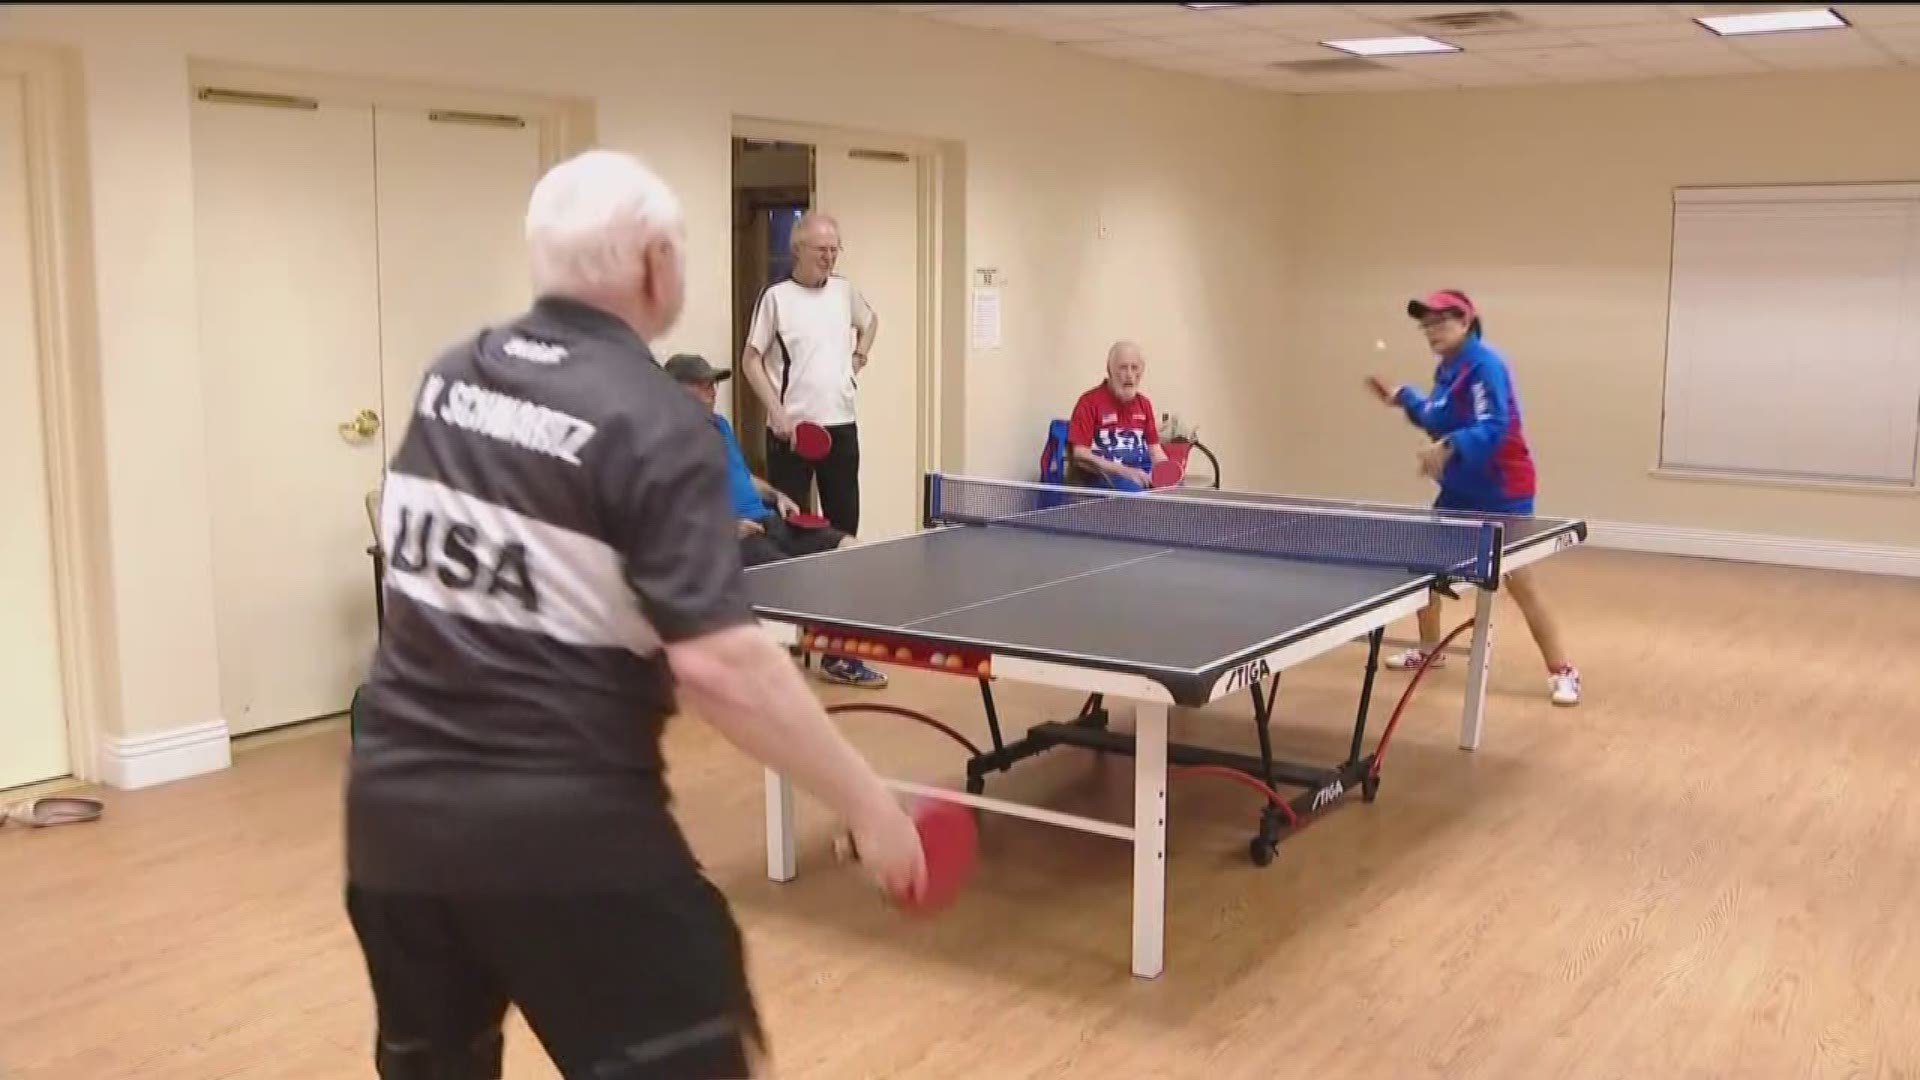 Hall of famers and world champions with centuries of experienced gathered Tuesday night at the La Costa Glen for a game of table tennis.